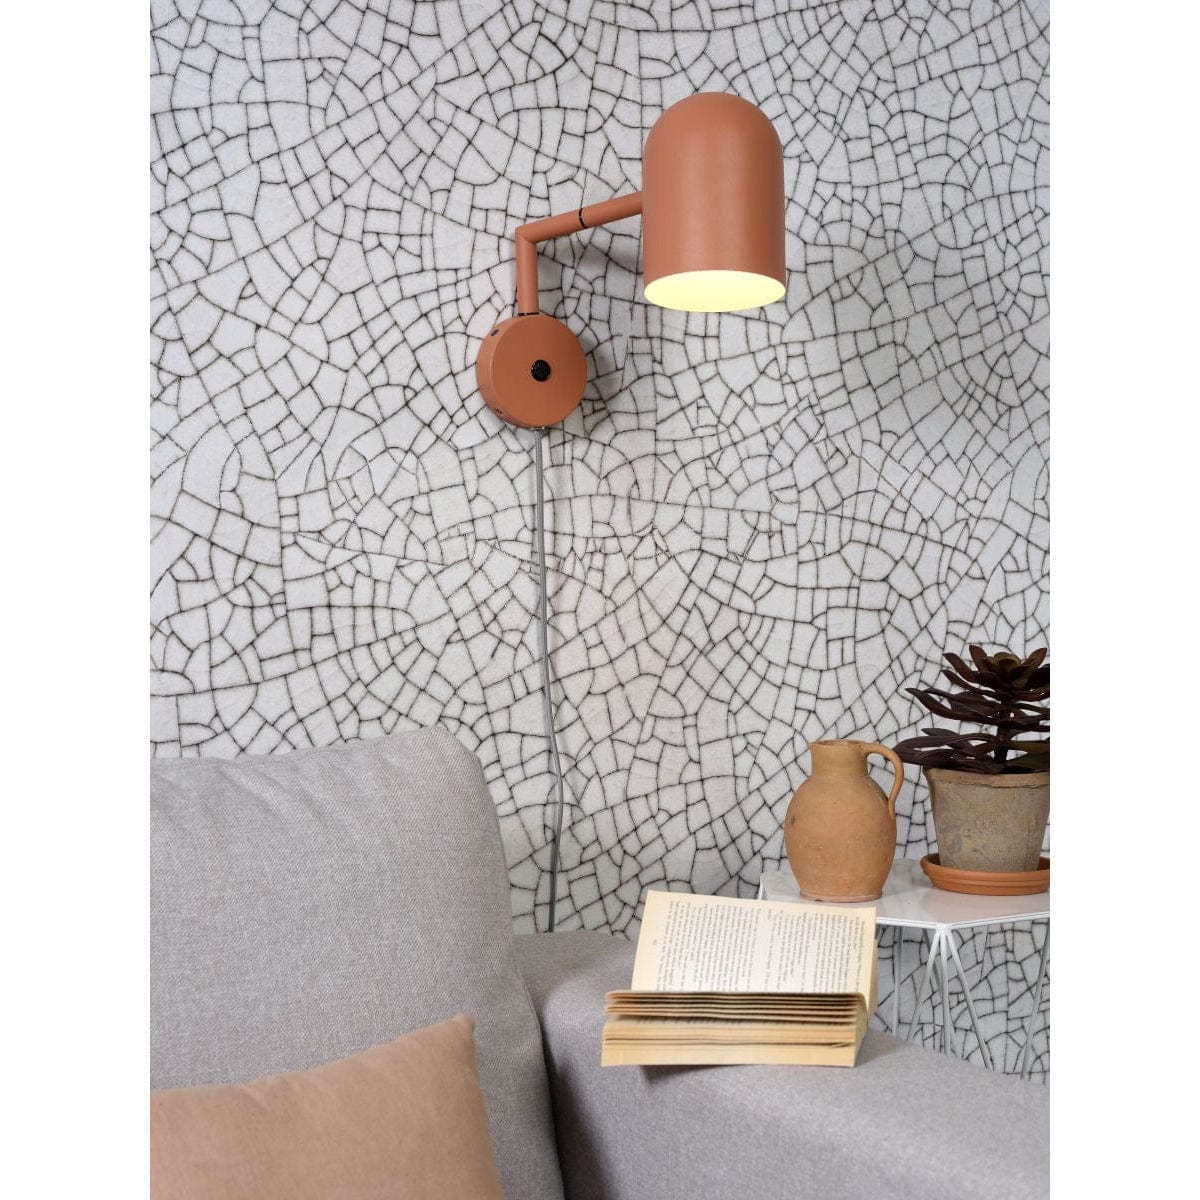 It's About RoMi Wall Lights Terracotta Marseille Wall Lamp, Black, Sand or Terra